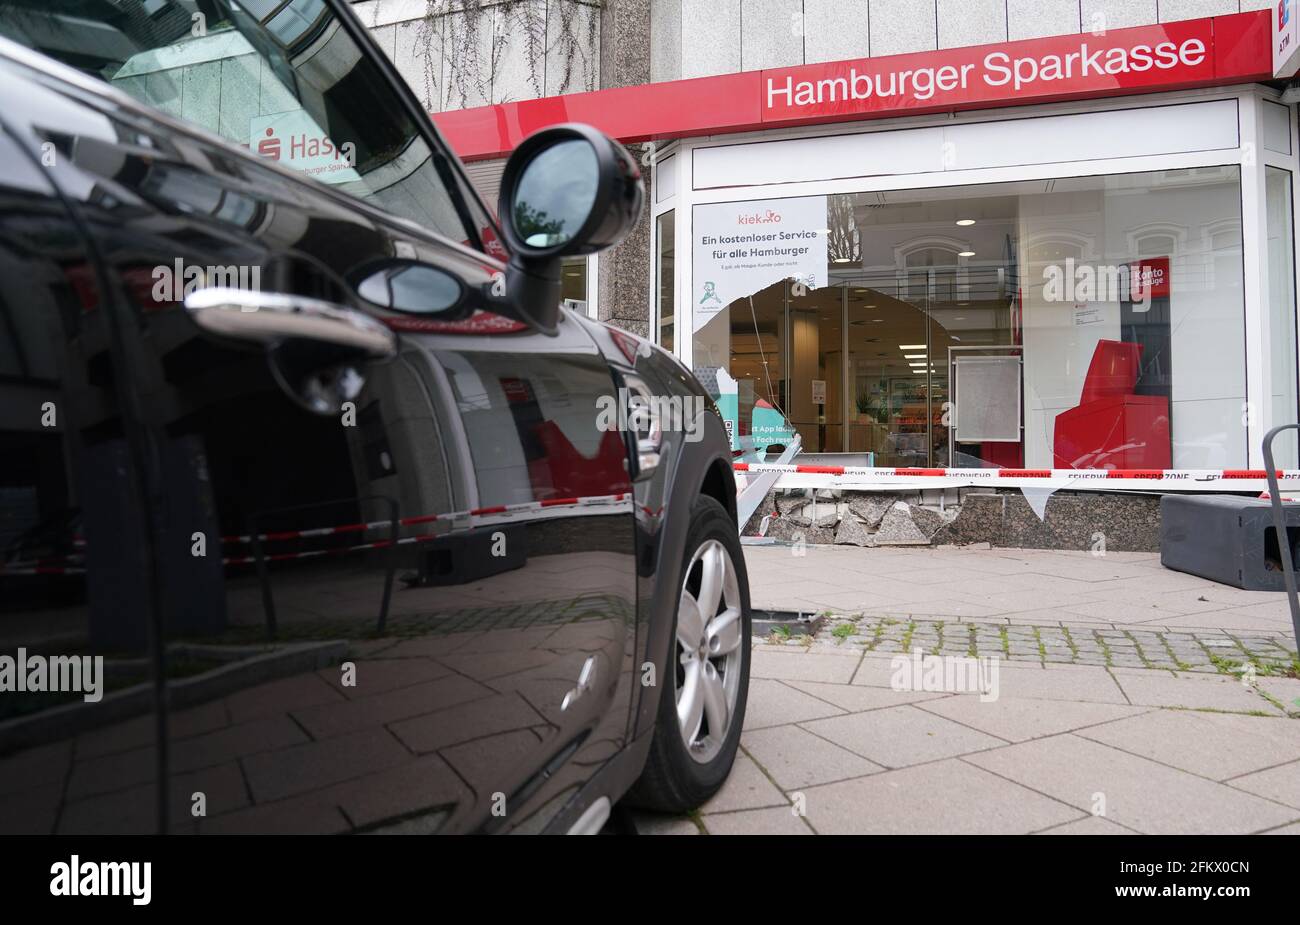 Hamburg, Germany. 04th May, 2021. The vehicle involved in the accident is standing in front of the destroyed shop window of a Haspa branch. In Waitzstraße in Hamburg, which is known for numerous 'shop window accidents', a car has once again crashed into the window of a shop. On Tuesday, a 73-year-old woman had lost control of her car and crashed it into the building housing the Hamburg savings bank Haspa, a police spokesman told the Deutsche Presse-Agentur in Hamburg. Credit: Marcus Brandt/dpa/Alamy Live News Stock Photo